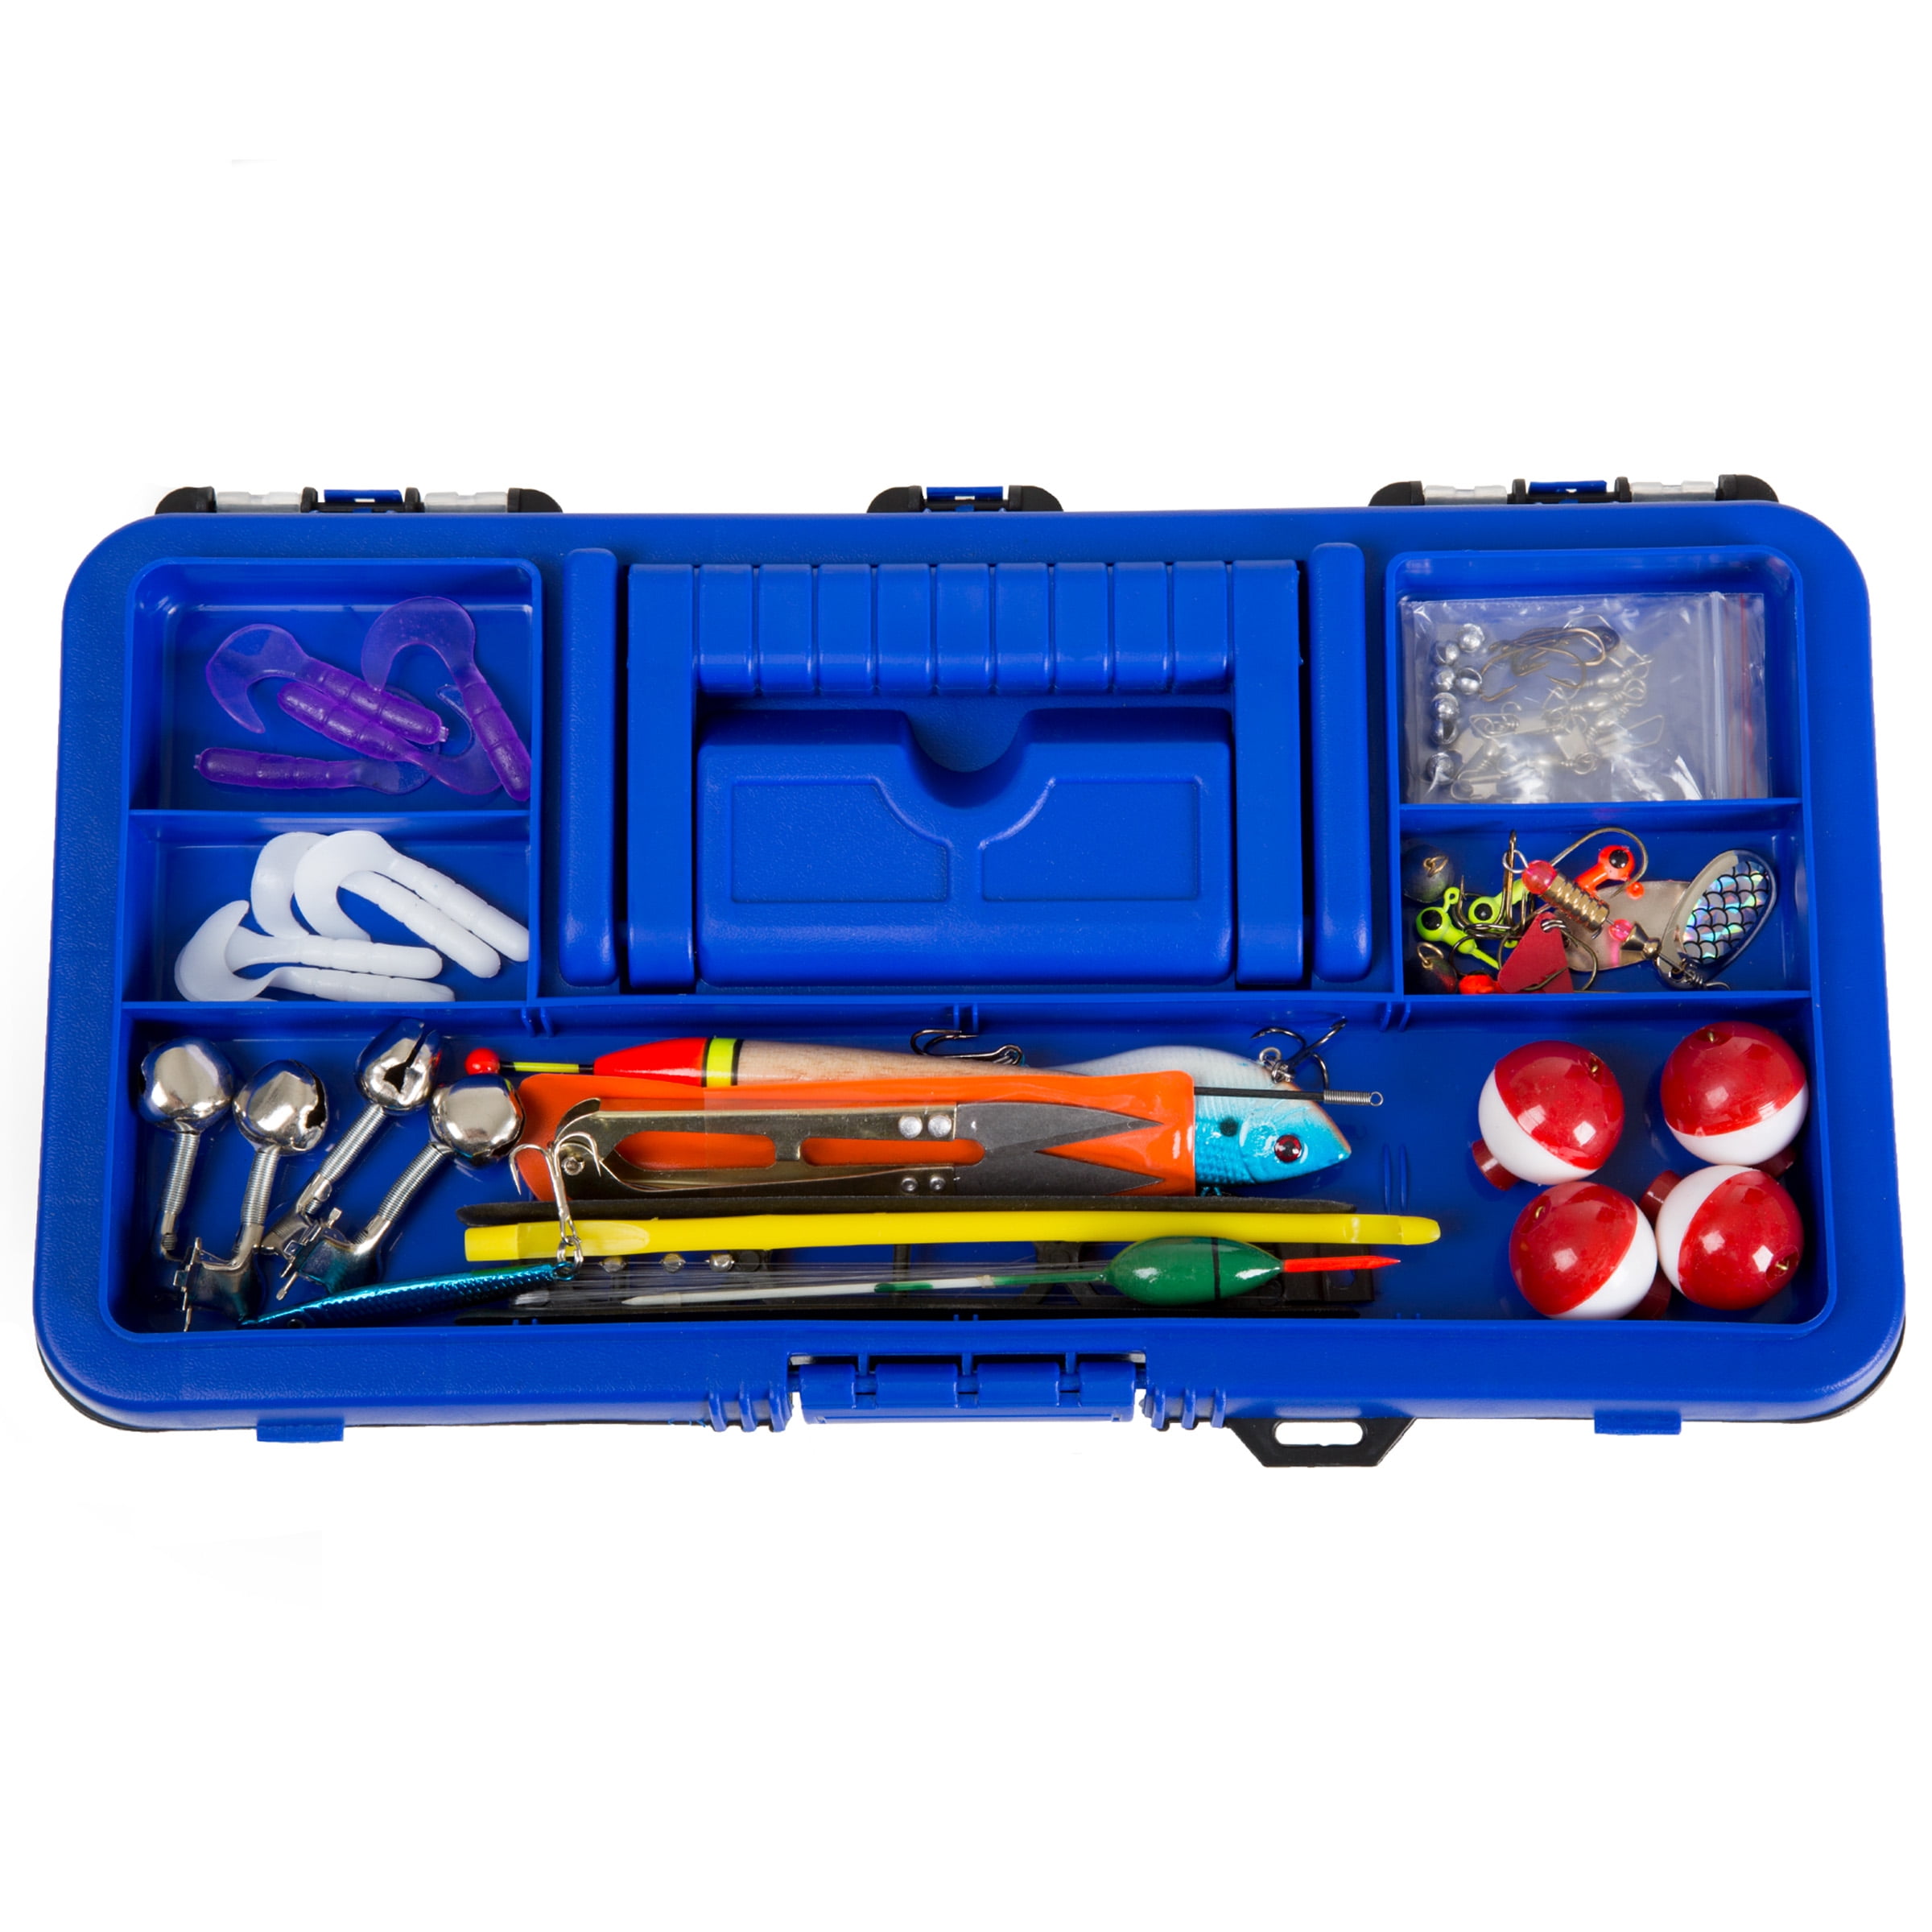 Leisure Sports Fishing Tackle Set And Box - 55 Pieces, Pink And